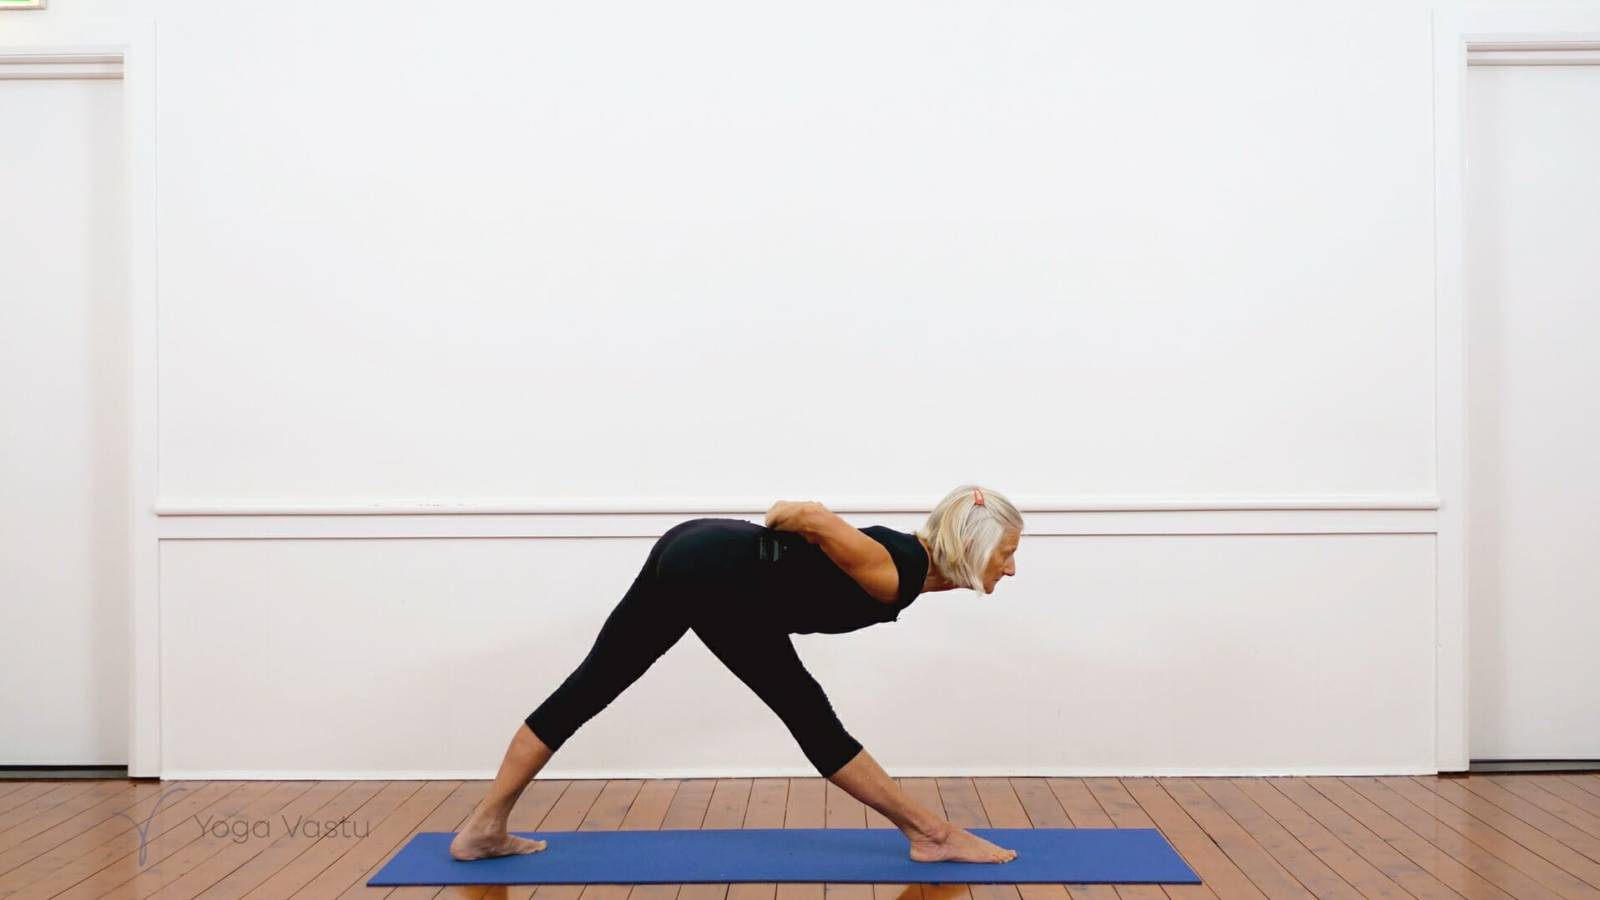 Iyengar yoga for beginners with minimal props: Miscellaneous with hip and  shoulder focus | Tense shoulders, Iyengar yoga, Downward dog pose